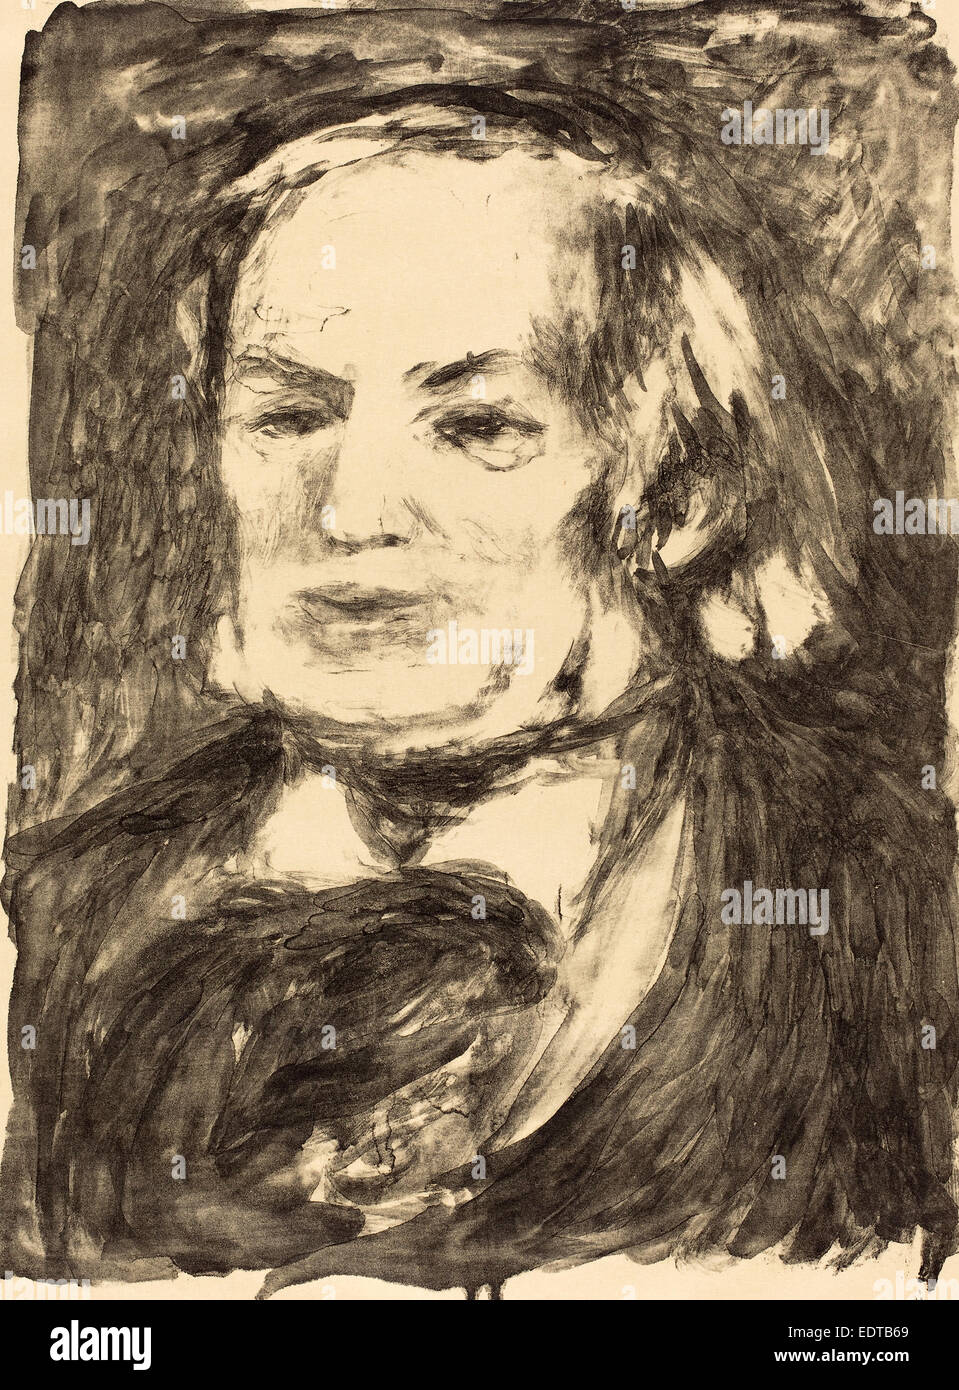 Auguste Renoir, Richard Wagner, French, 1841 - 1919, c. 1900, lithograph on japan paper Stock Photo